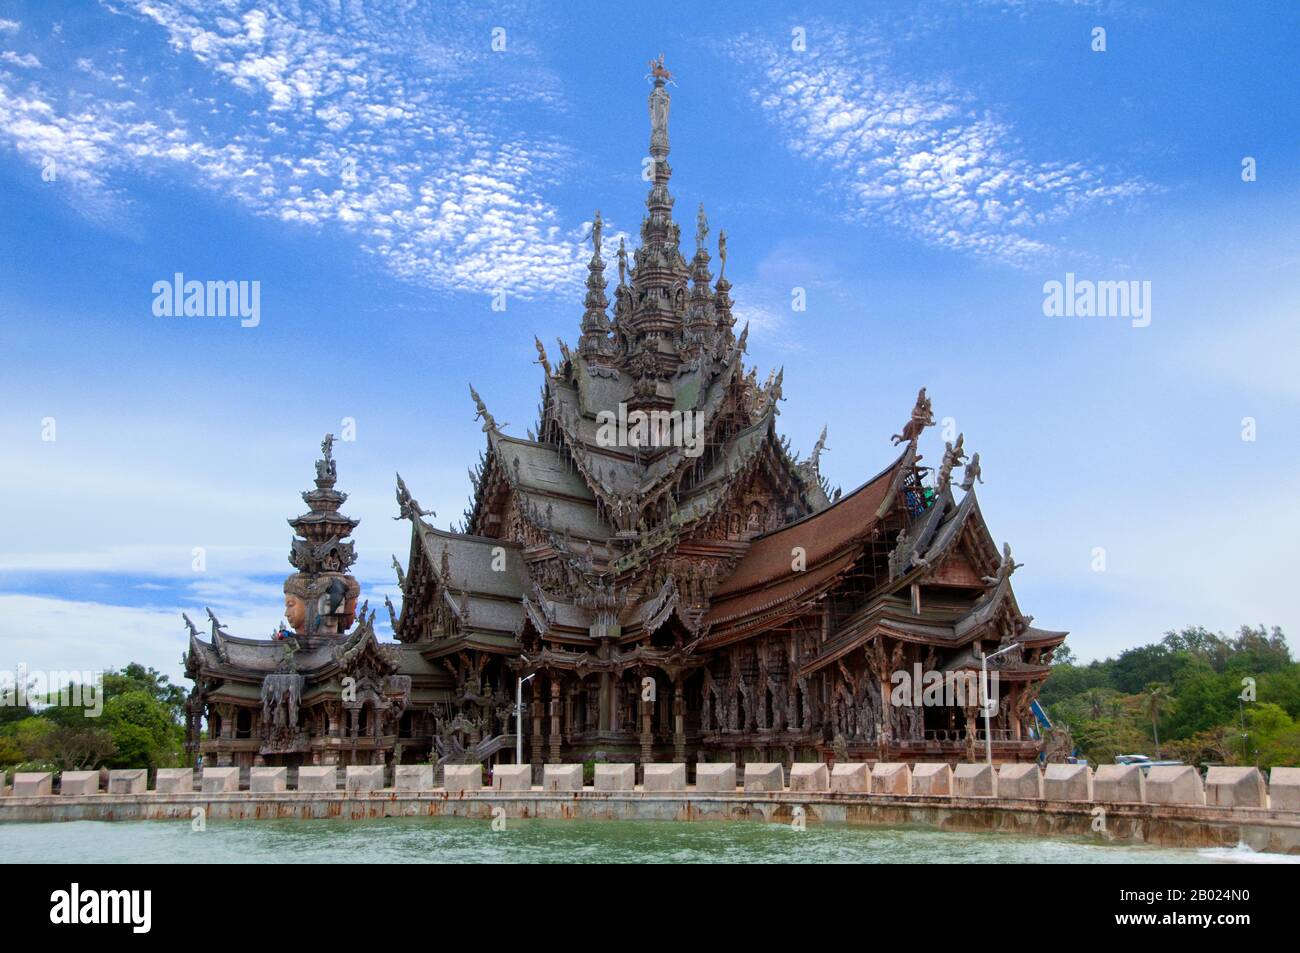 The Sanctuary of Truth is an all-wood building filled with sculptures based  on traditional Buddhist and Hindu motifs. The building is close to 105  meters (345 feet) high and covers an area